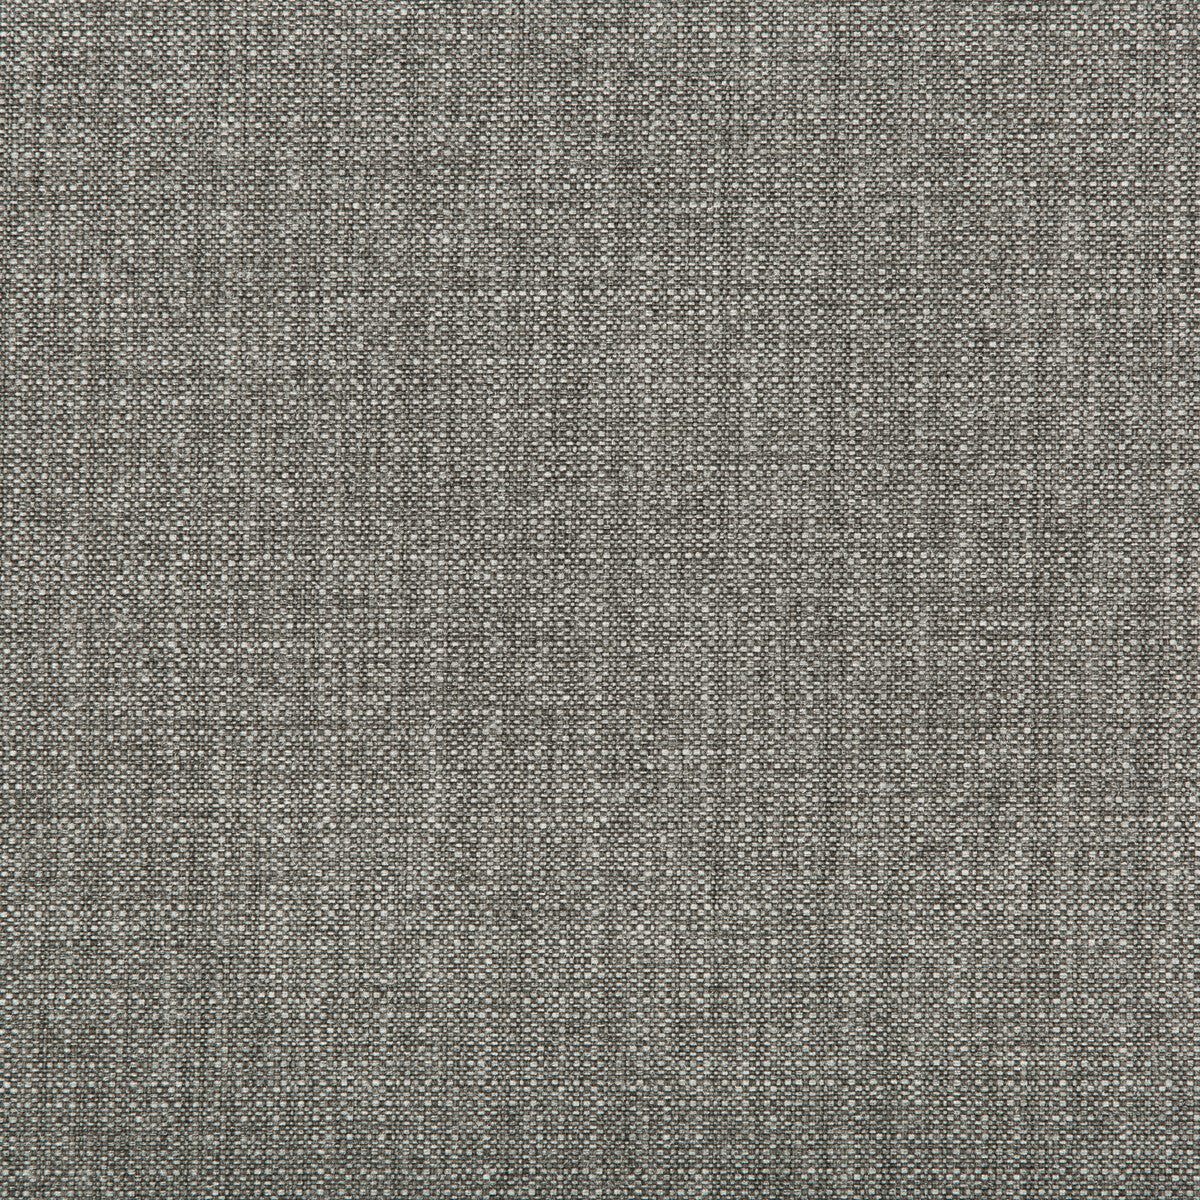 Kravet Contract fabric in 35443-21 color - pattern 35443.21.0 - by Kravet Contract